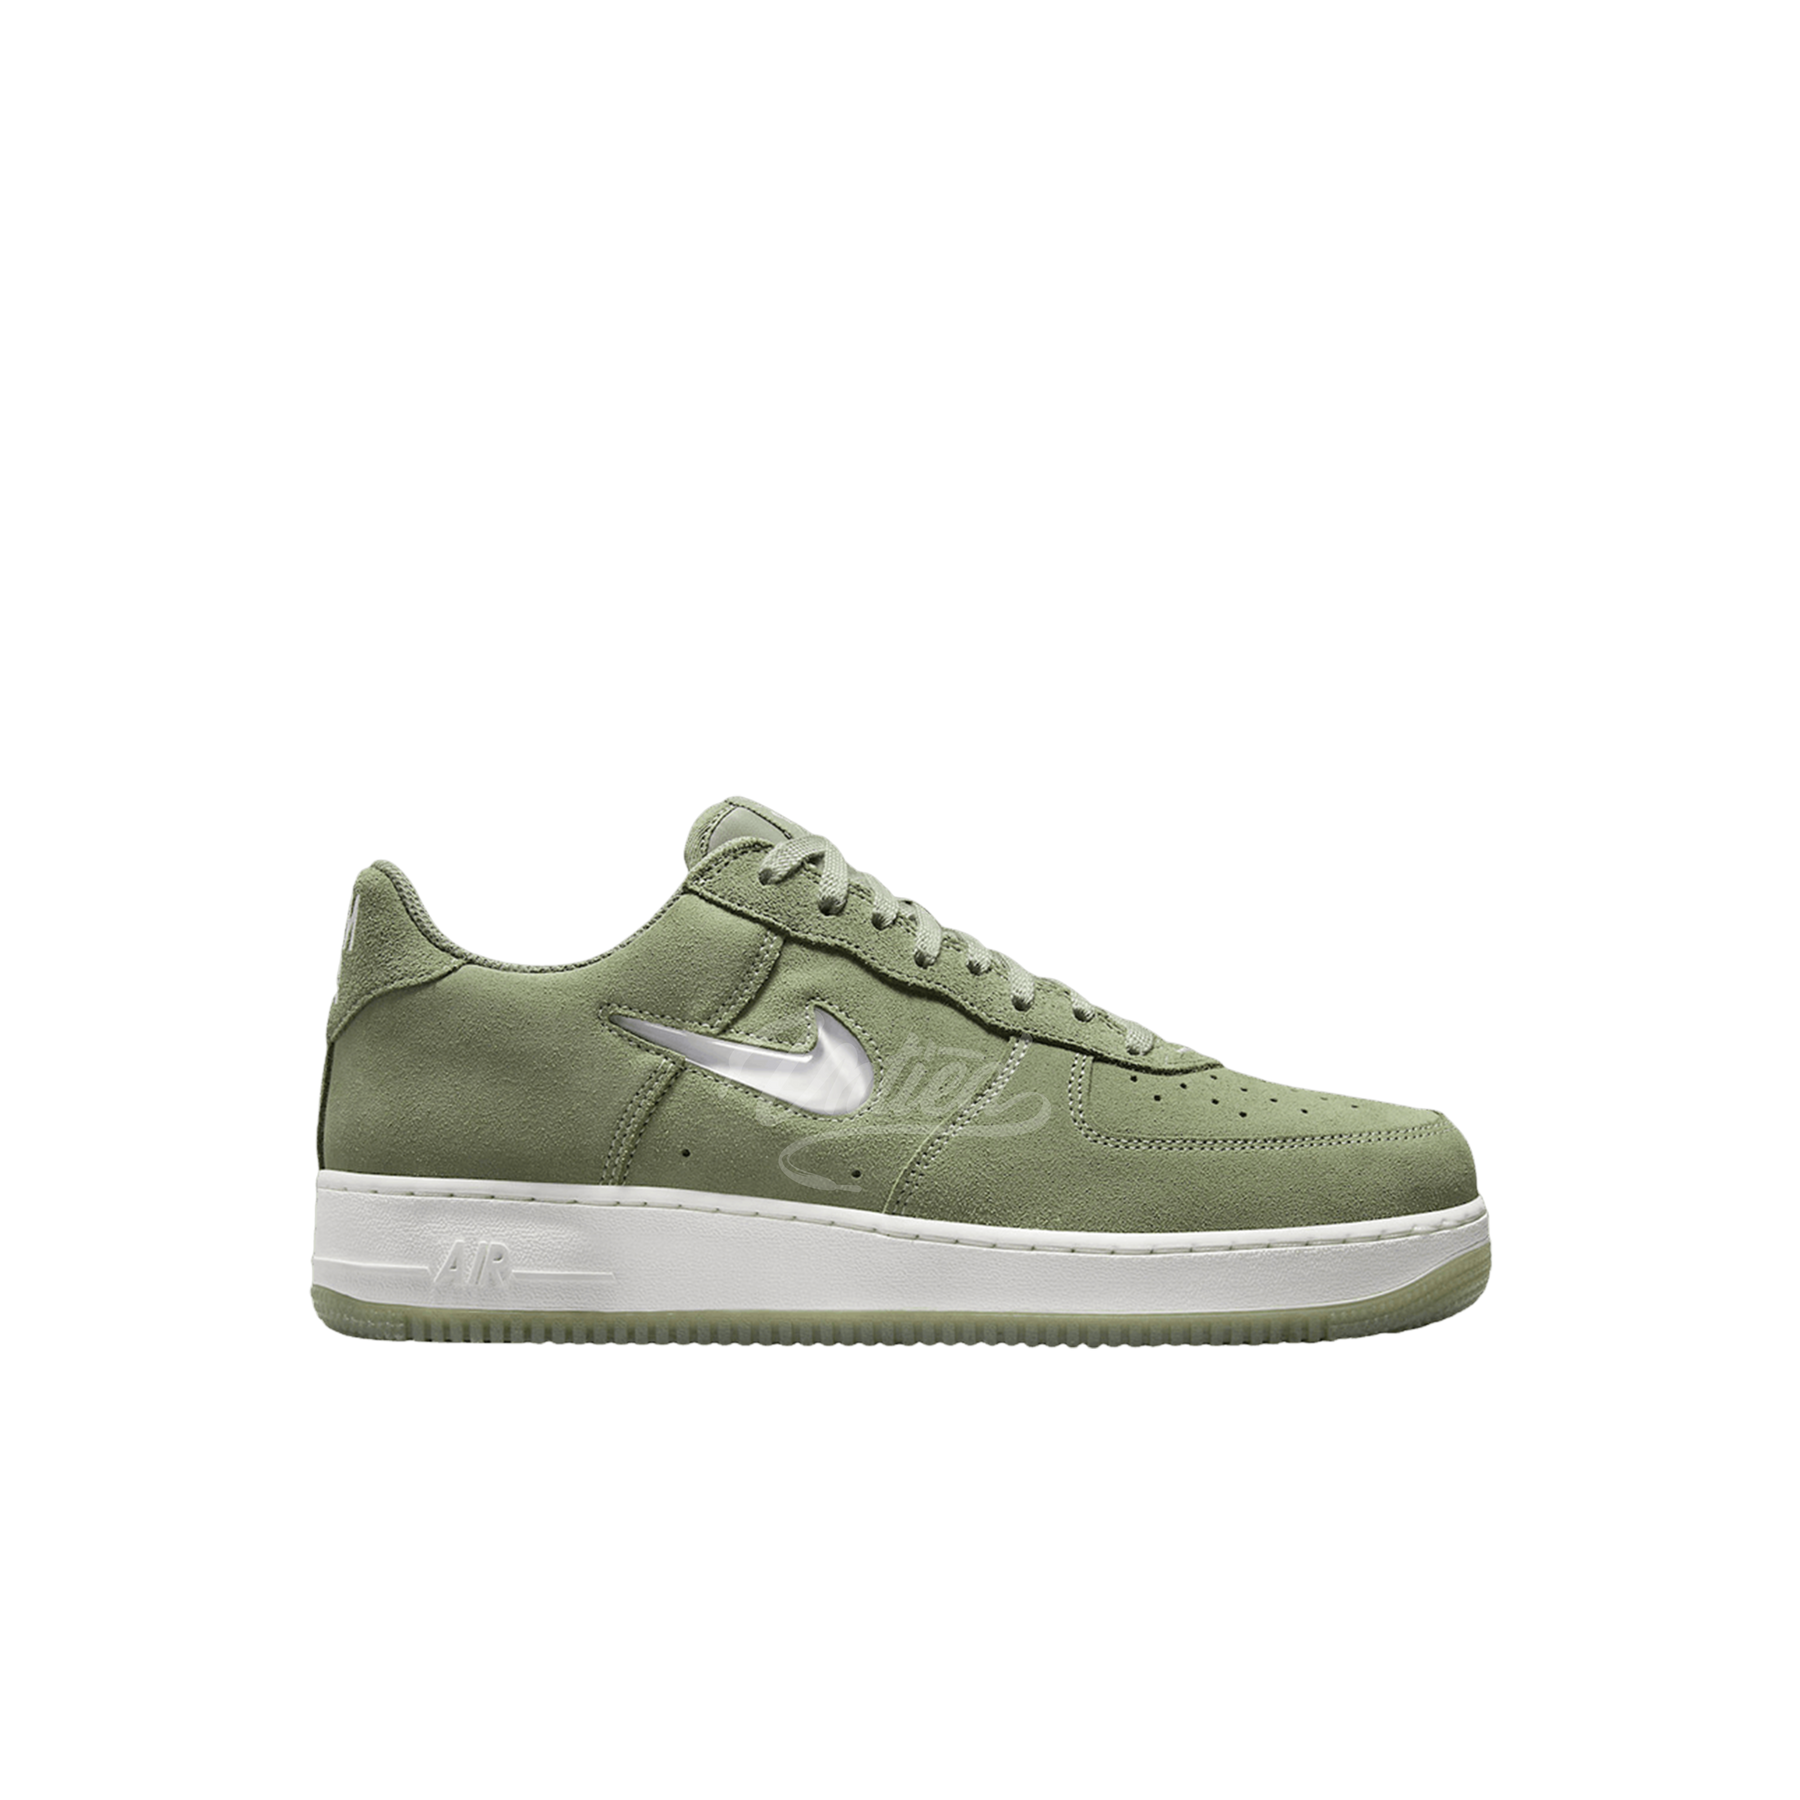 Air Force 1 Color of the Month "Olive Jewel"